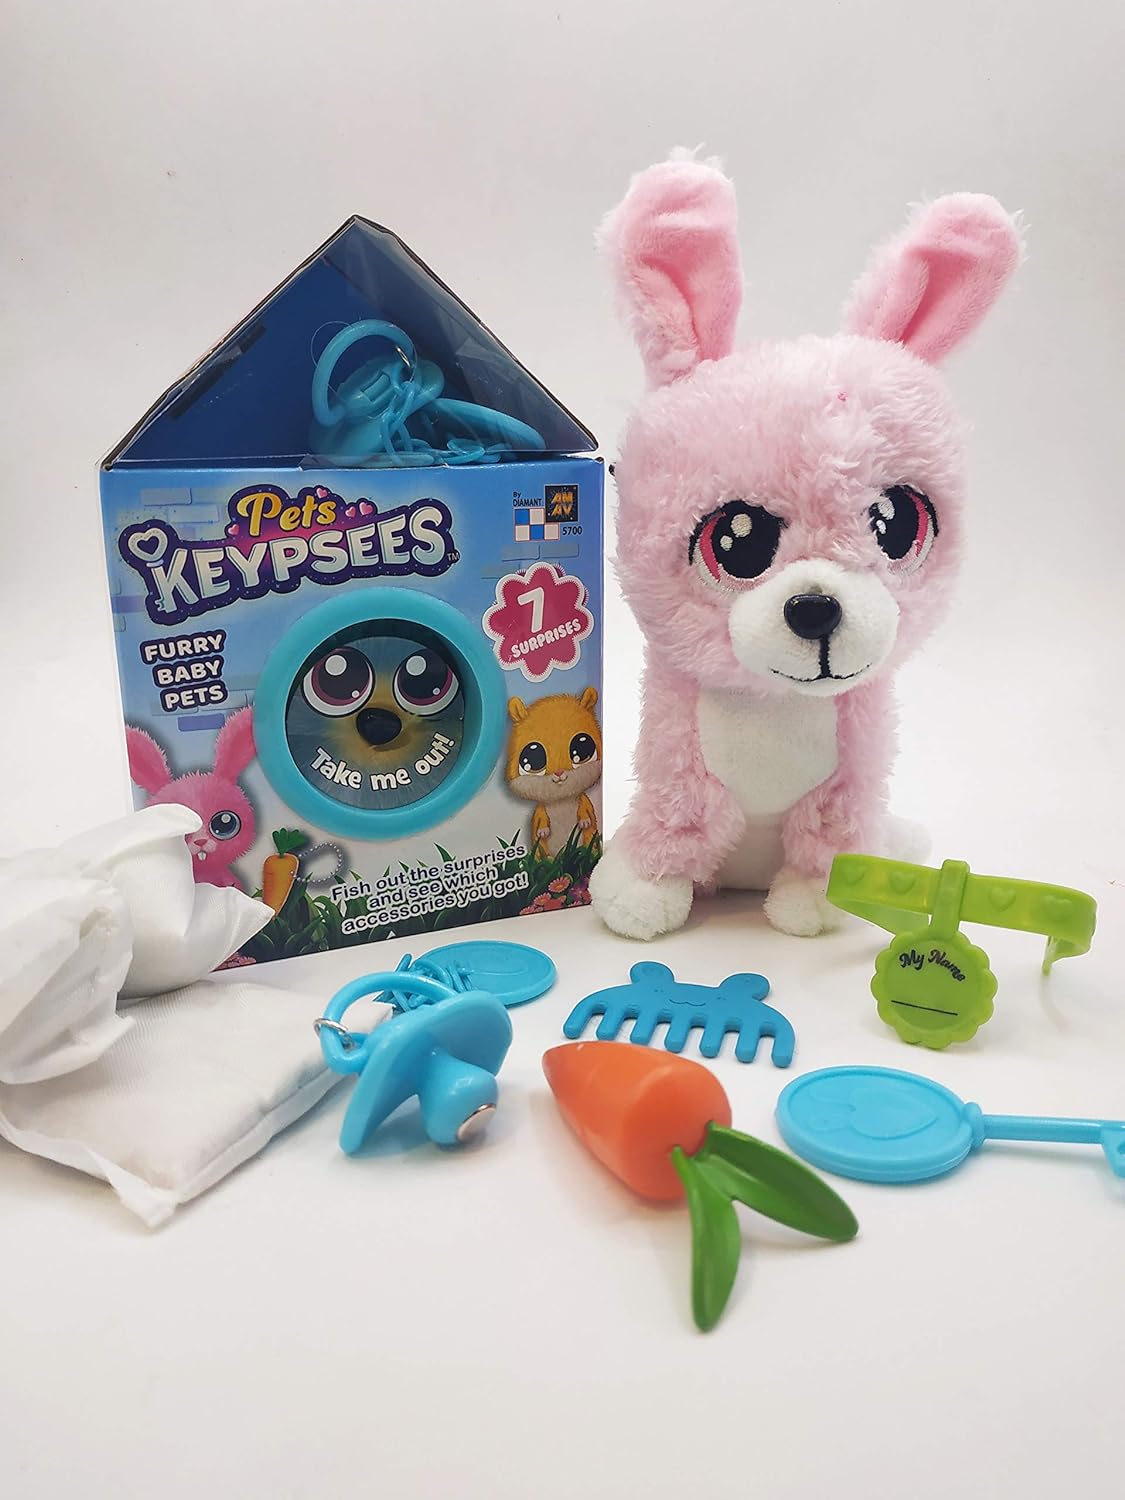 AMAV Toys - Keypsees Pets - Plush Doll Play Set - Fish Out The Surprise Fluffy Furry Pet and 7 Surprise Bags - for Boys & Girls Aged 4+